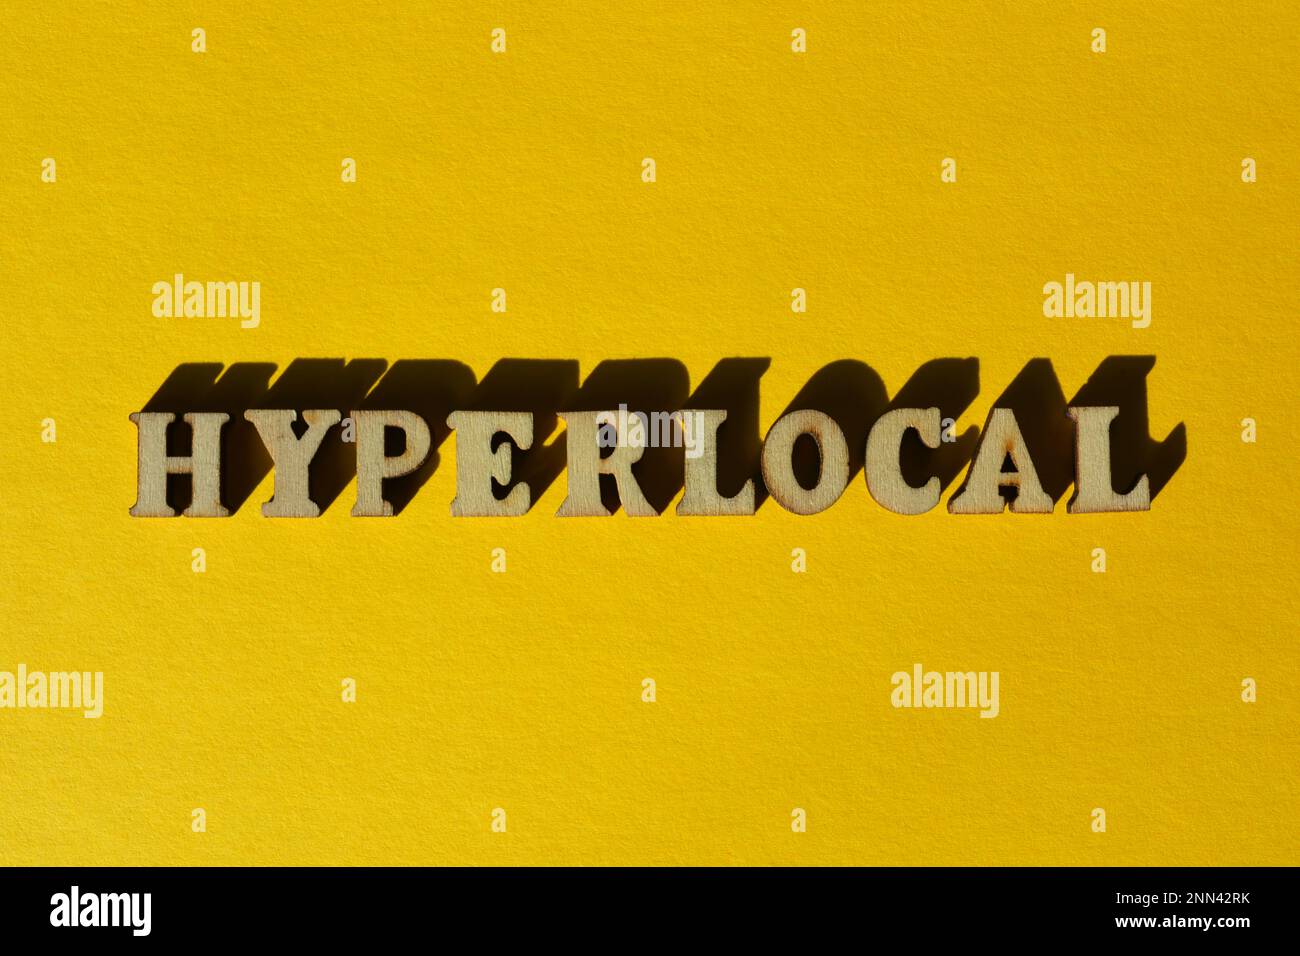 Hyperlocal, word in wooden alphabet letter isolated on yellow background Stock Photo